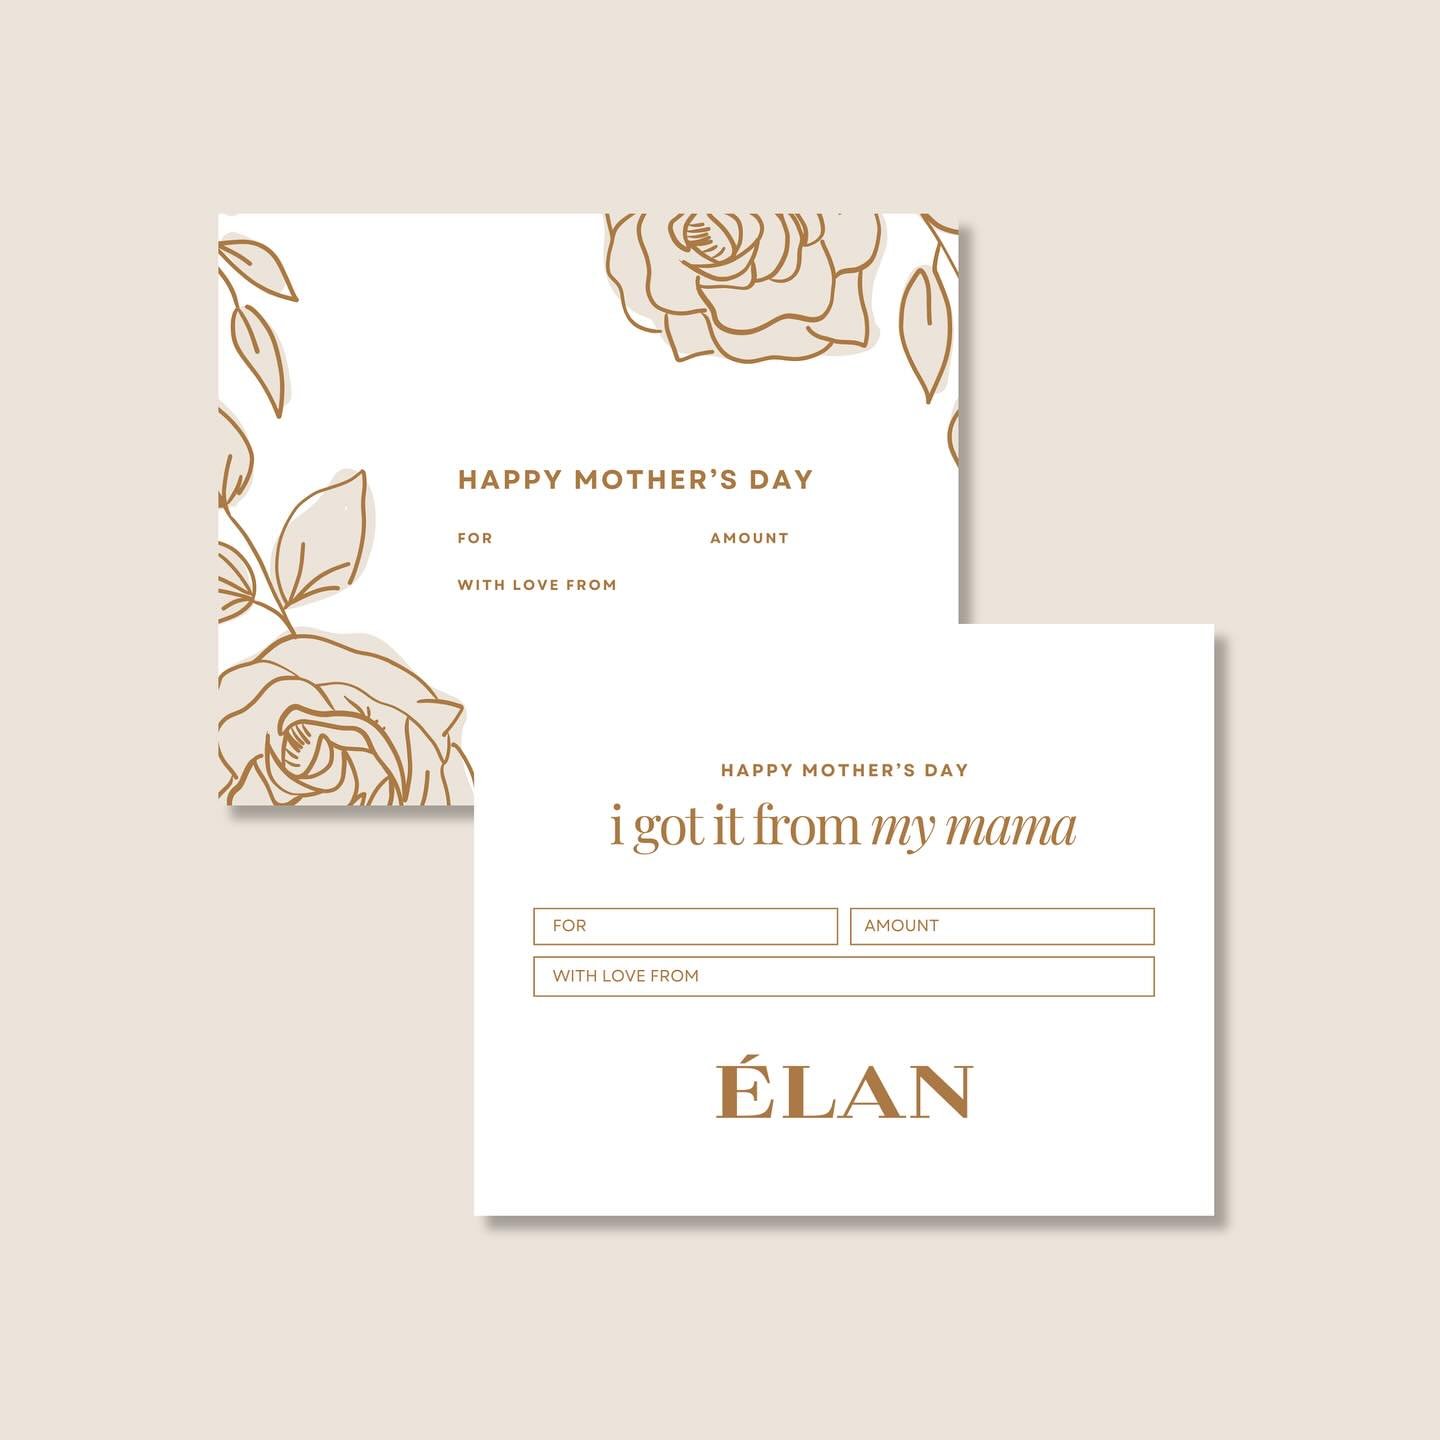 This one&rsquo;s for the moms 🫶🏼 Celebrate the special women in your life with an &Eacute;LAN Aesthetics gift card! Now through May 12th, receive a complimentary $50 certificate (to keep or gift!) when you purchase a $250 gift card.

The details &m